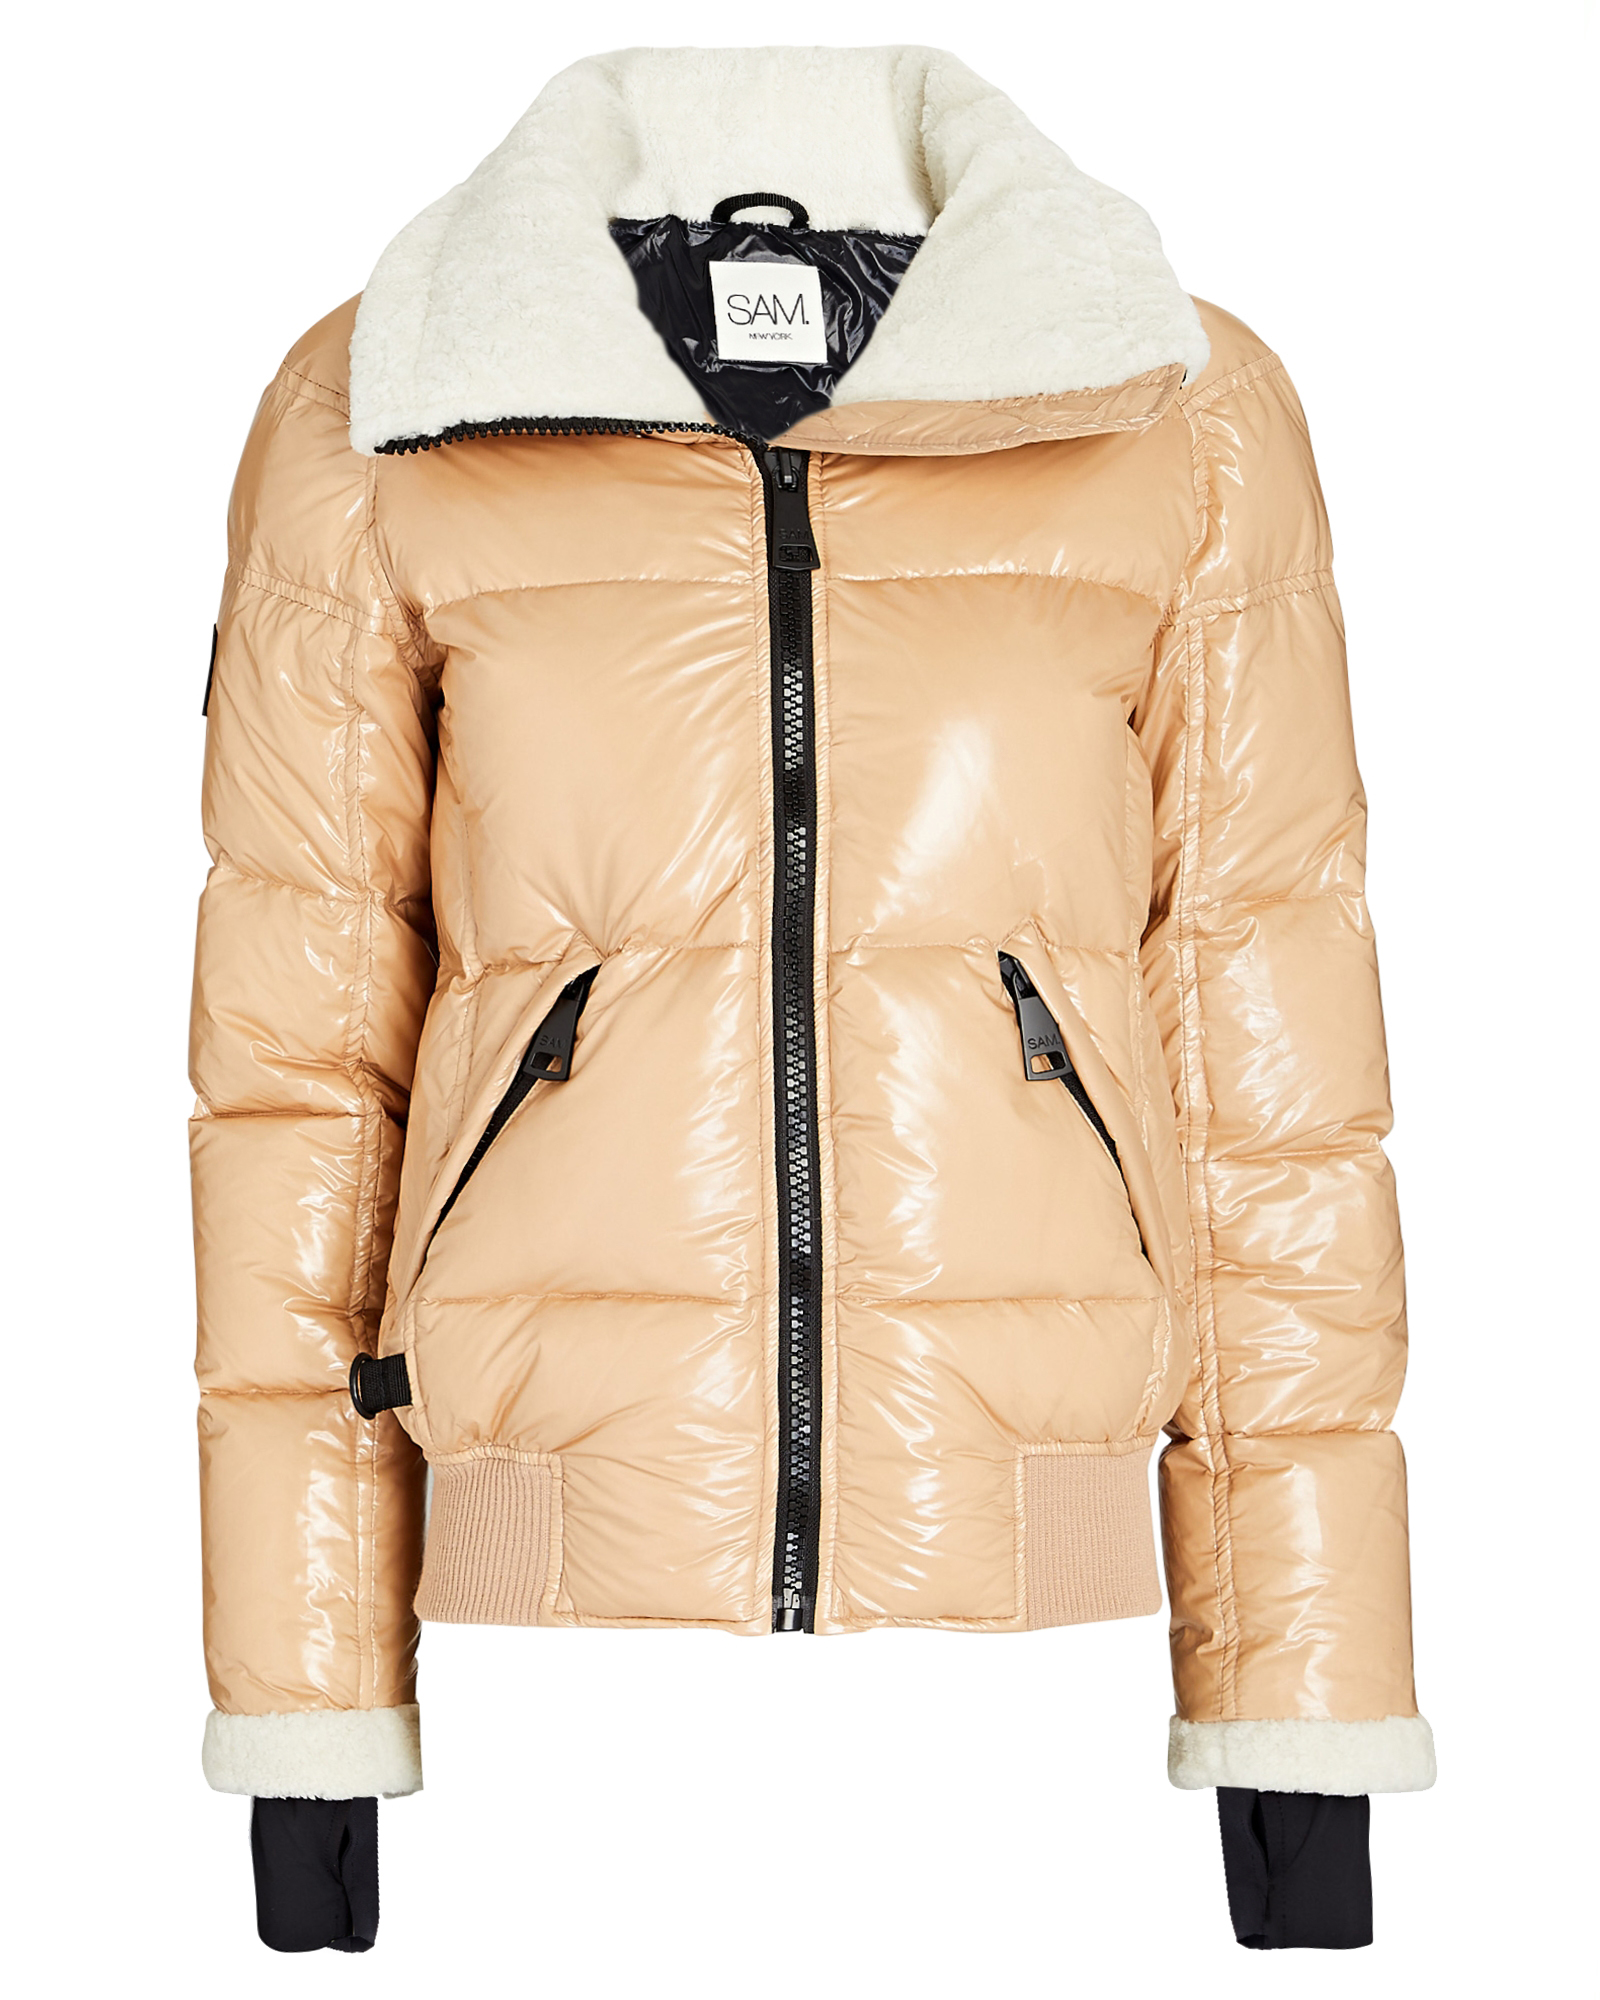 SAM. Ellie Shearling-Trimmed Quilted Puffer Jacket | INTERMIX®